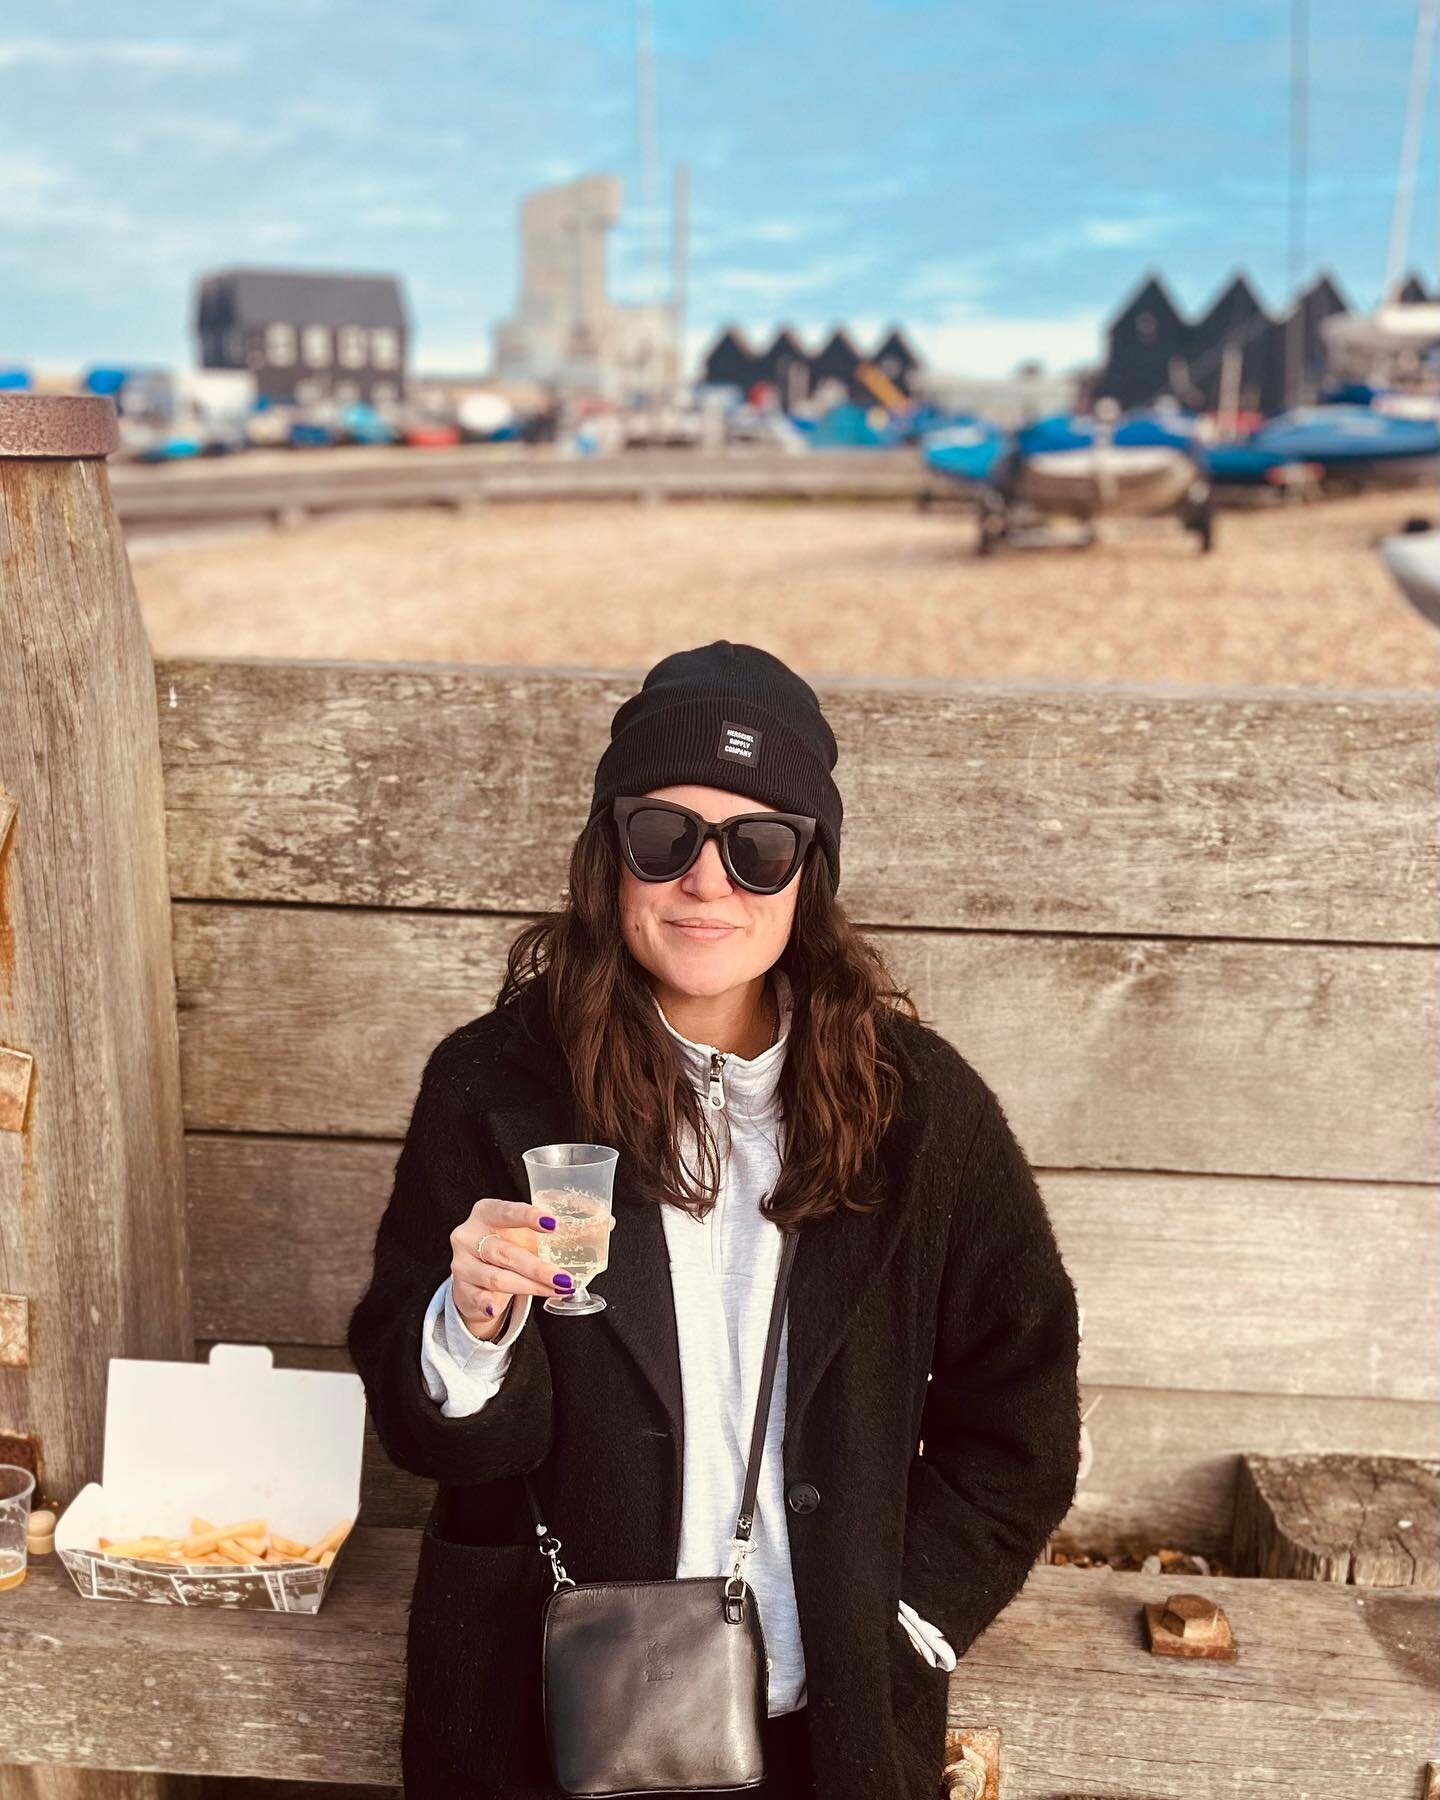 This weekend I celebrated another year around the 🌞 it wasn&rsquo;t anything too fancy&hellip; a bit of sea air, fish and chips &amp; a couple of glasses of fizz with the fam but honestly it was the wholesome vibes I needed. Feeling refreshed and ex